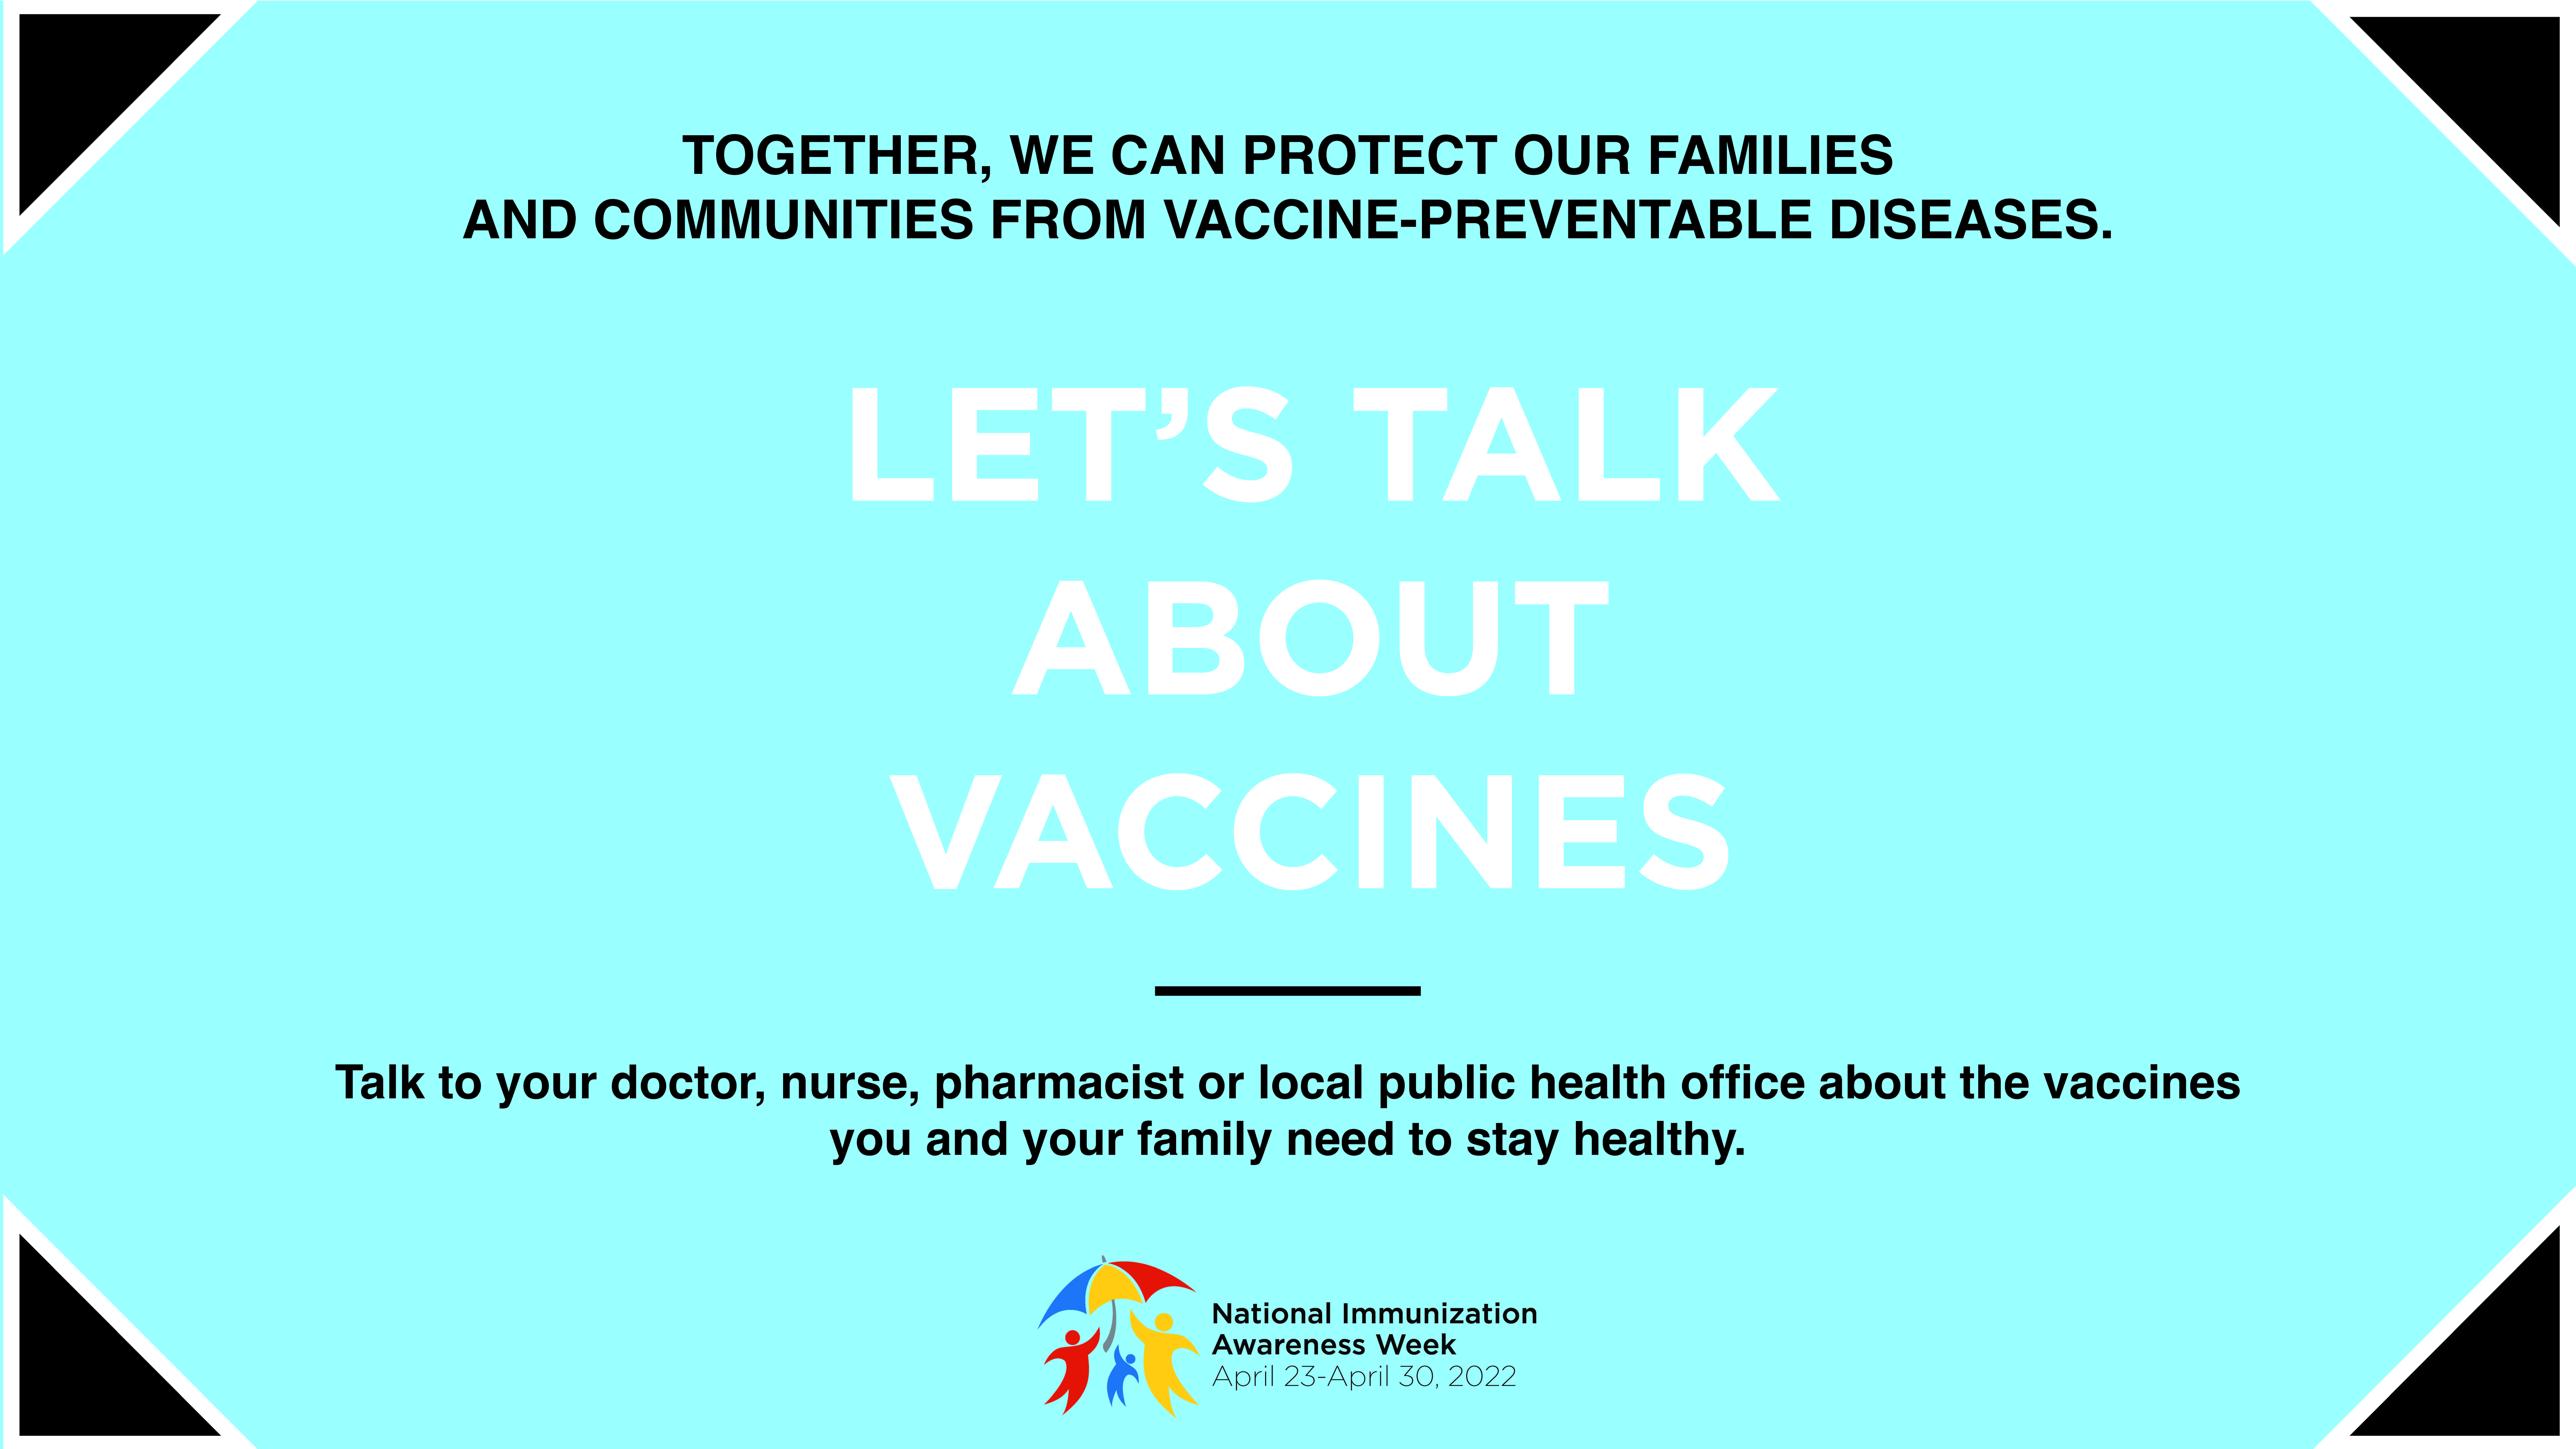 Let's talk about vaccines - customizable social media image for Twitter